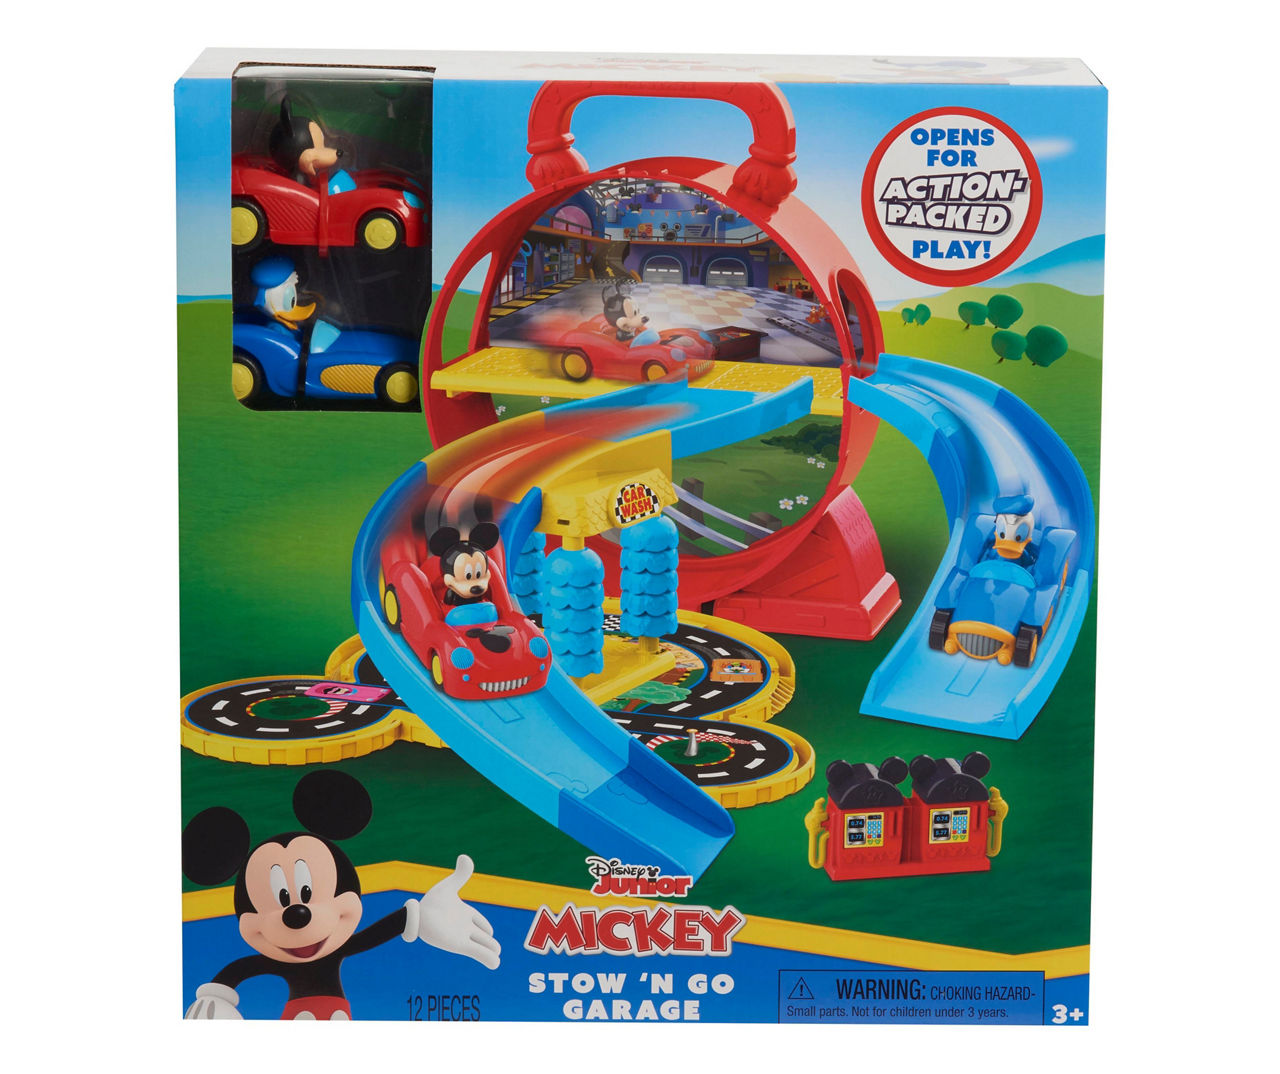 DISNEY JUNIOR Toys on Giant Trampoline MICKEY MOUSE Doc McStuffins